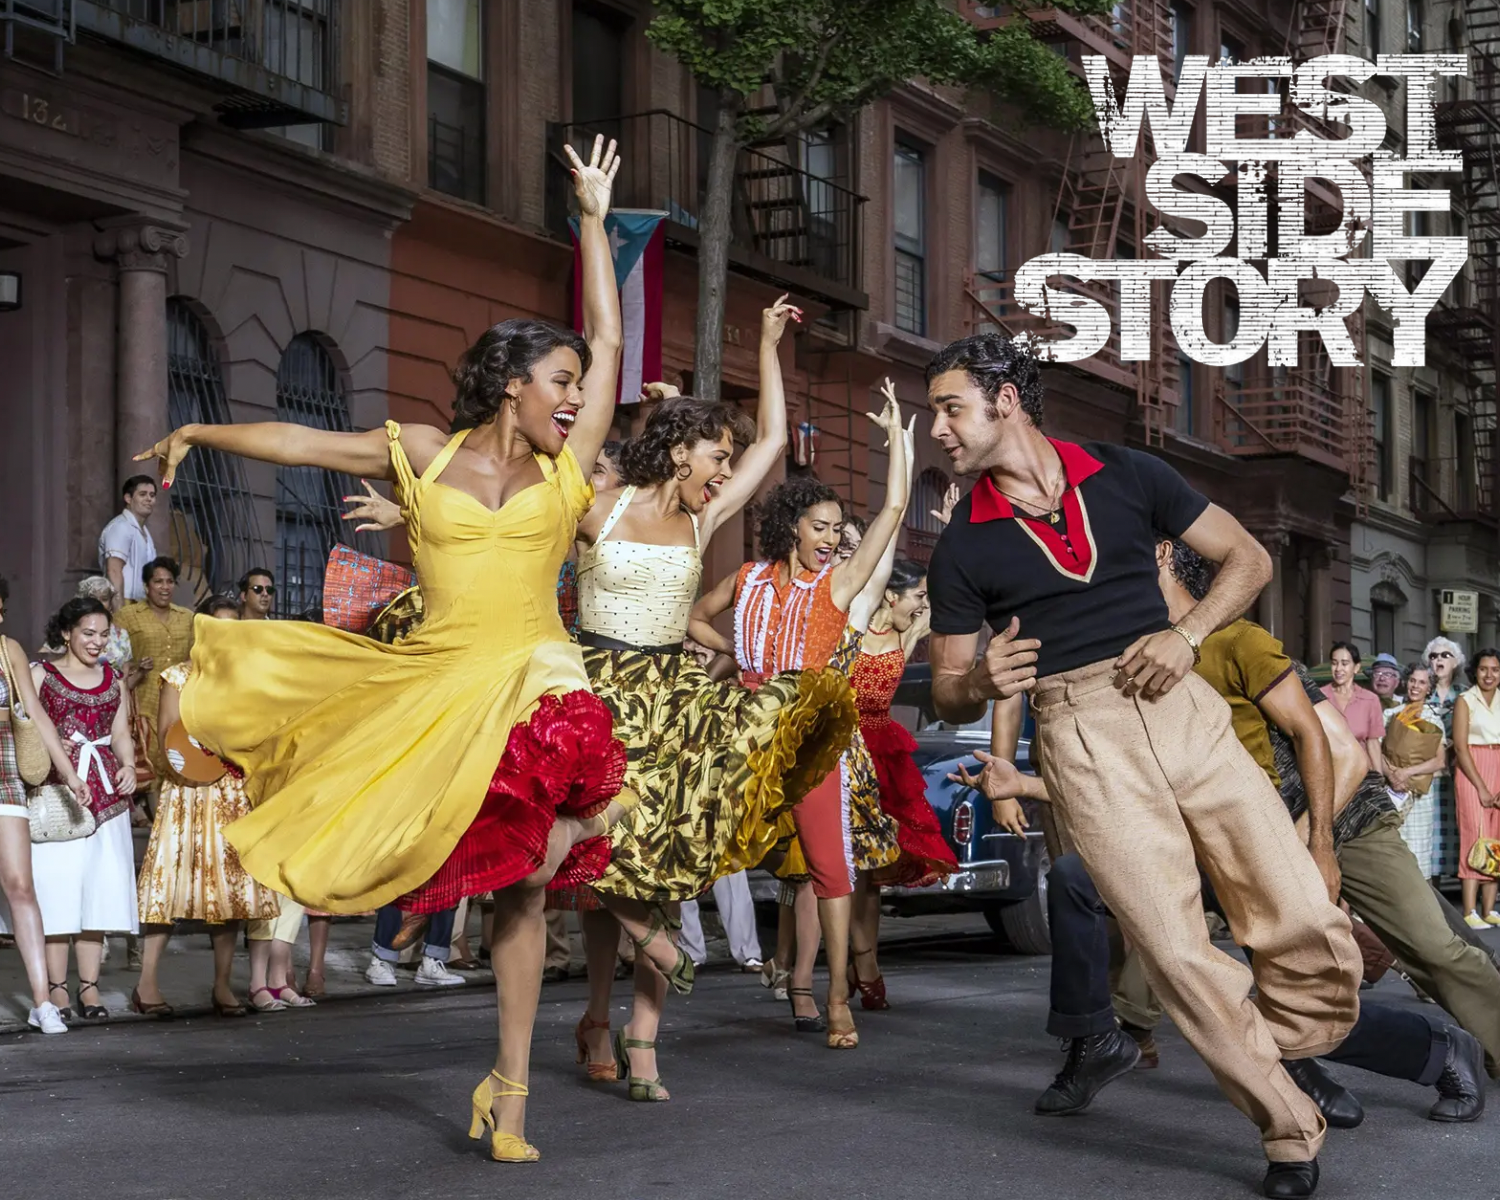 West Side Story has been nominated for 7 Academy Awards